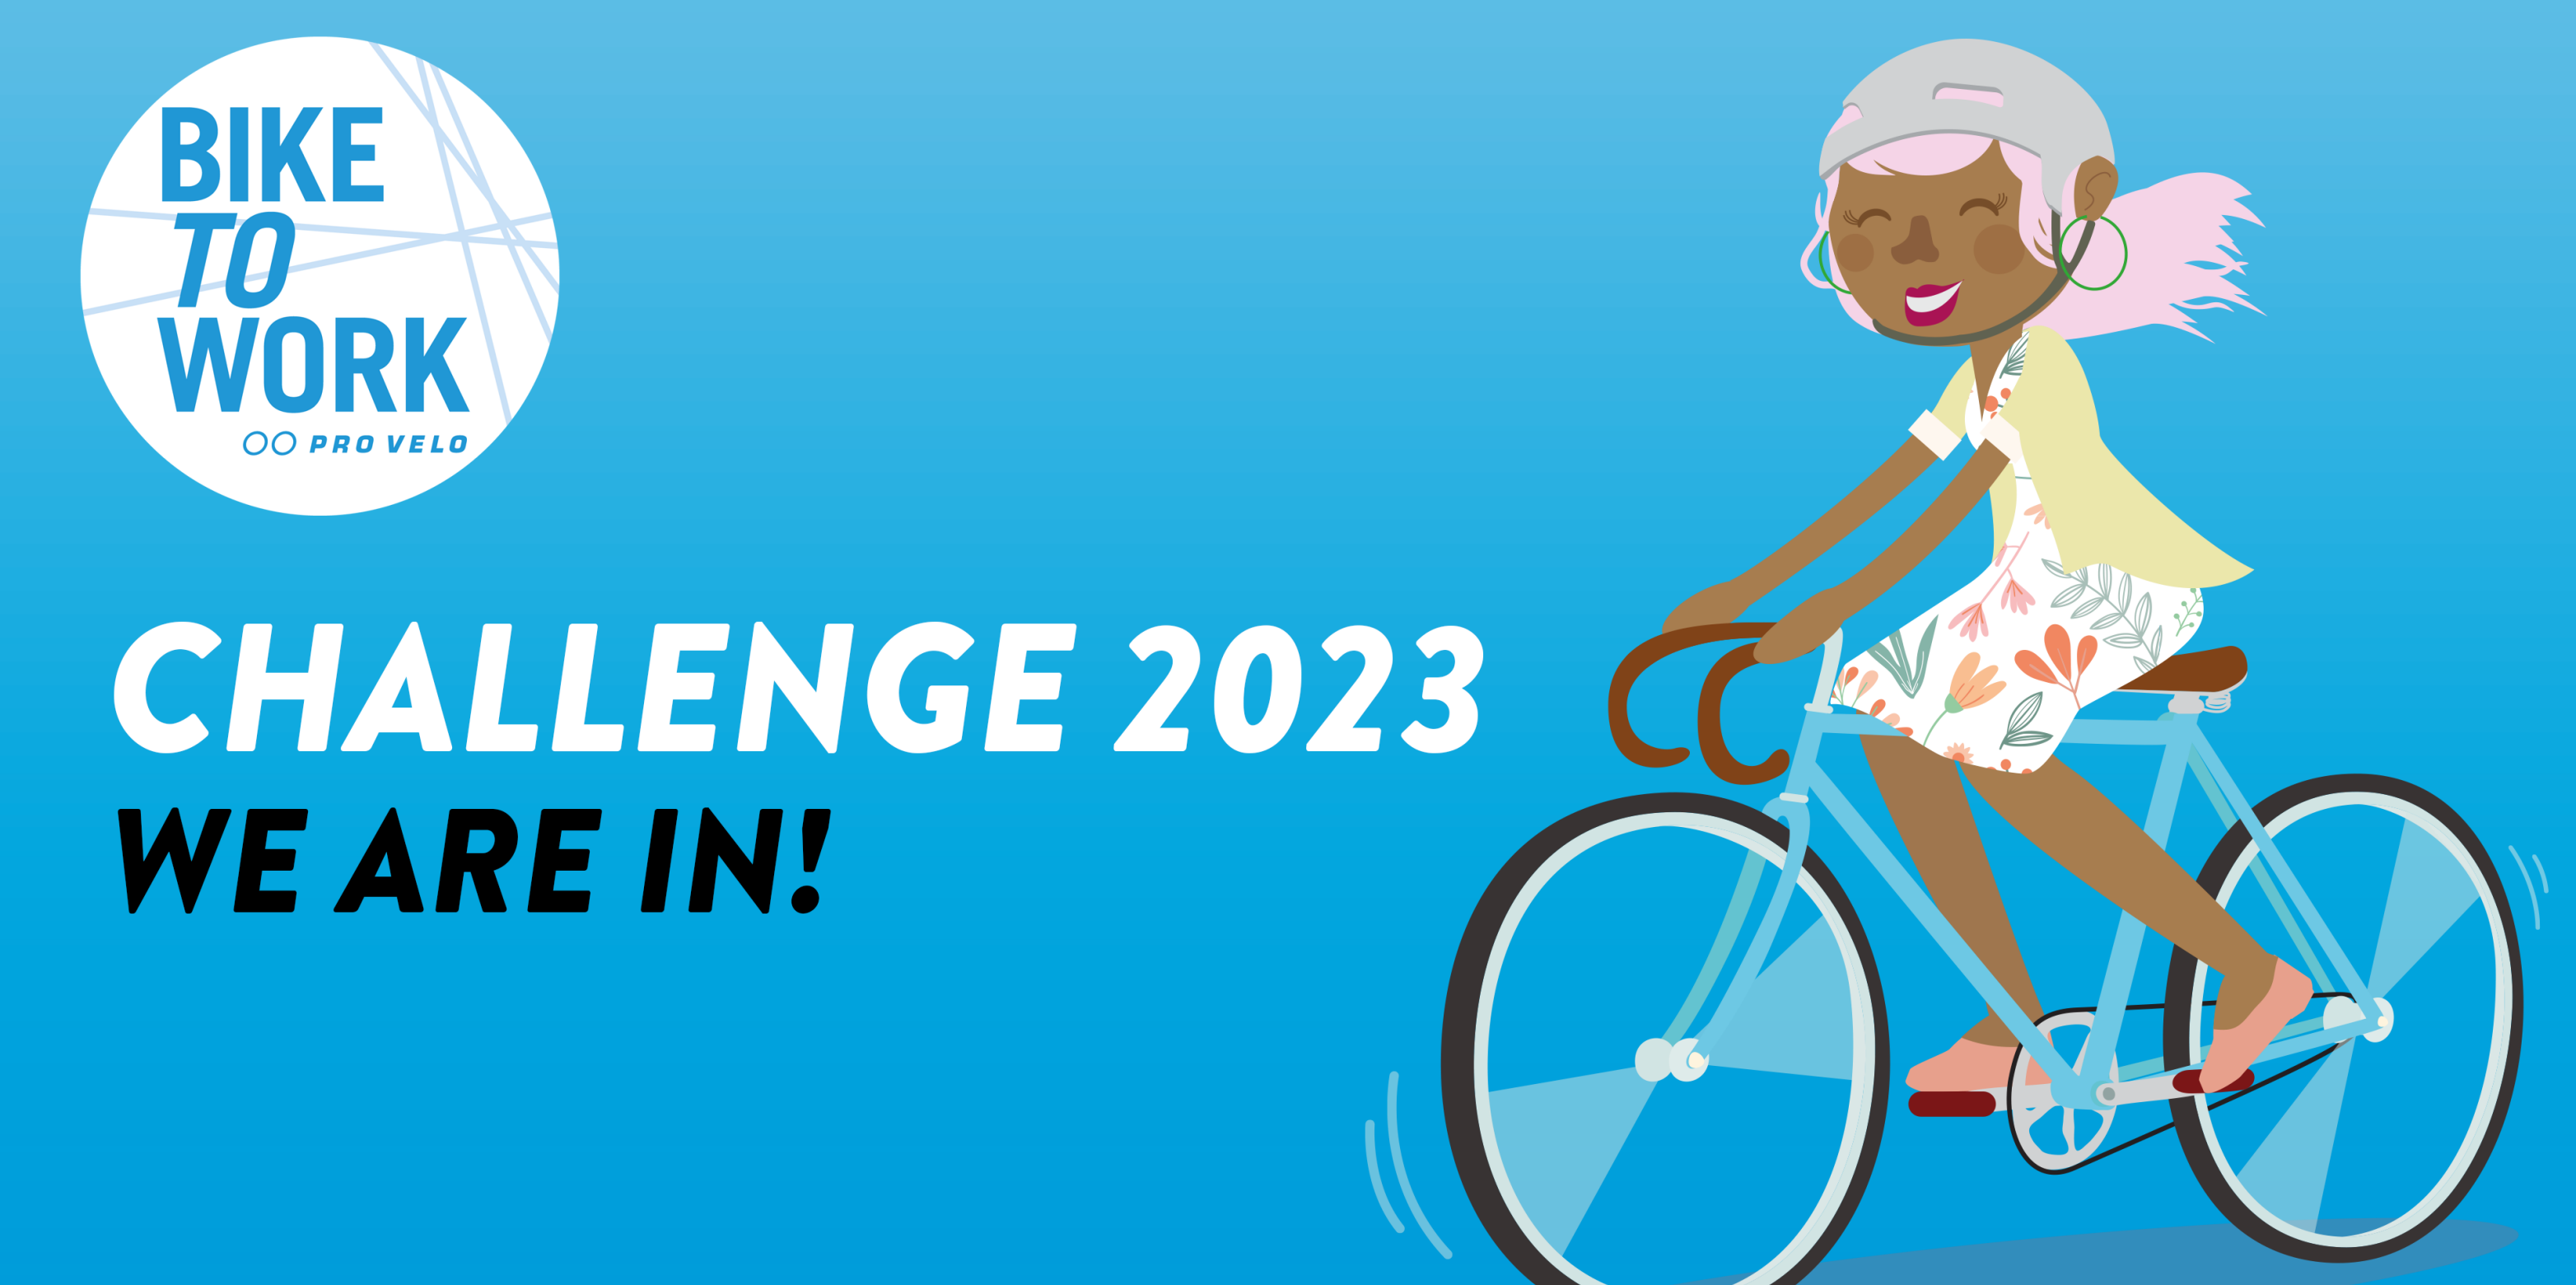 Challenge 2023 we are in! Bike To Work. Illustration woman on bike.